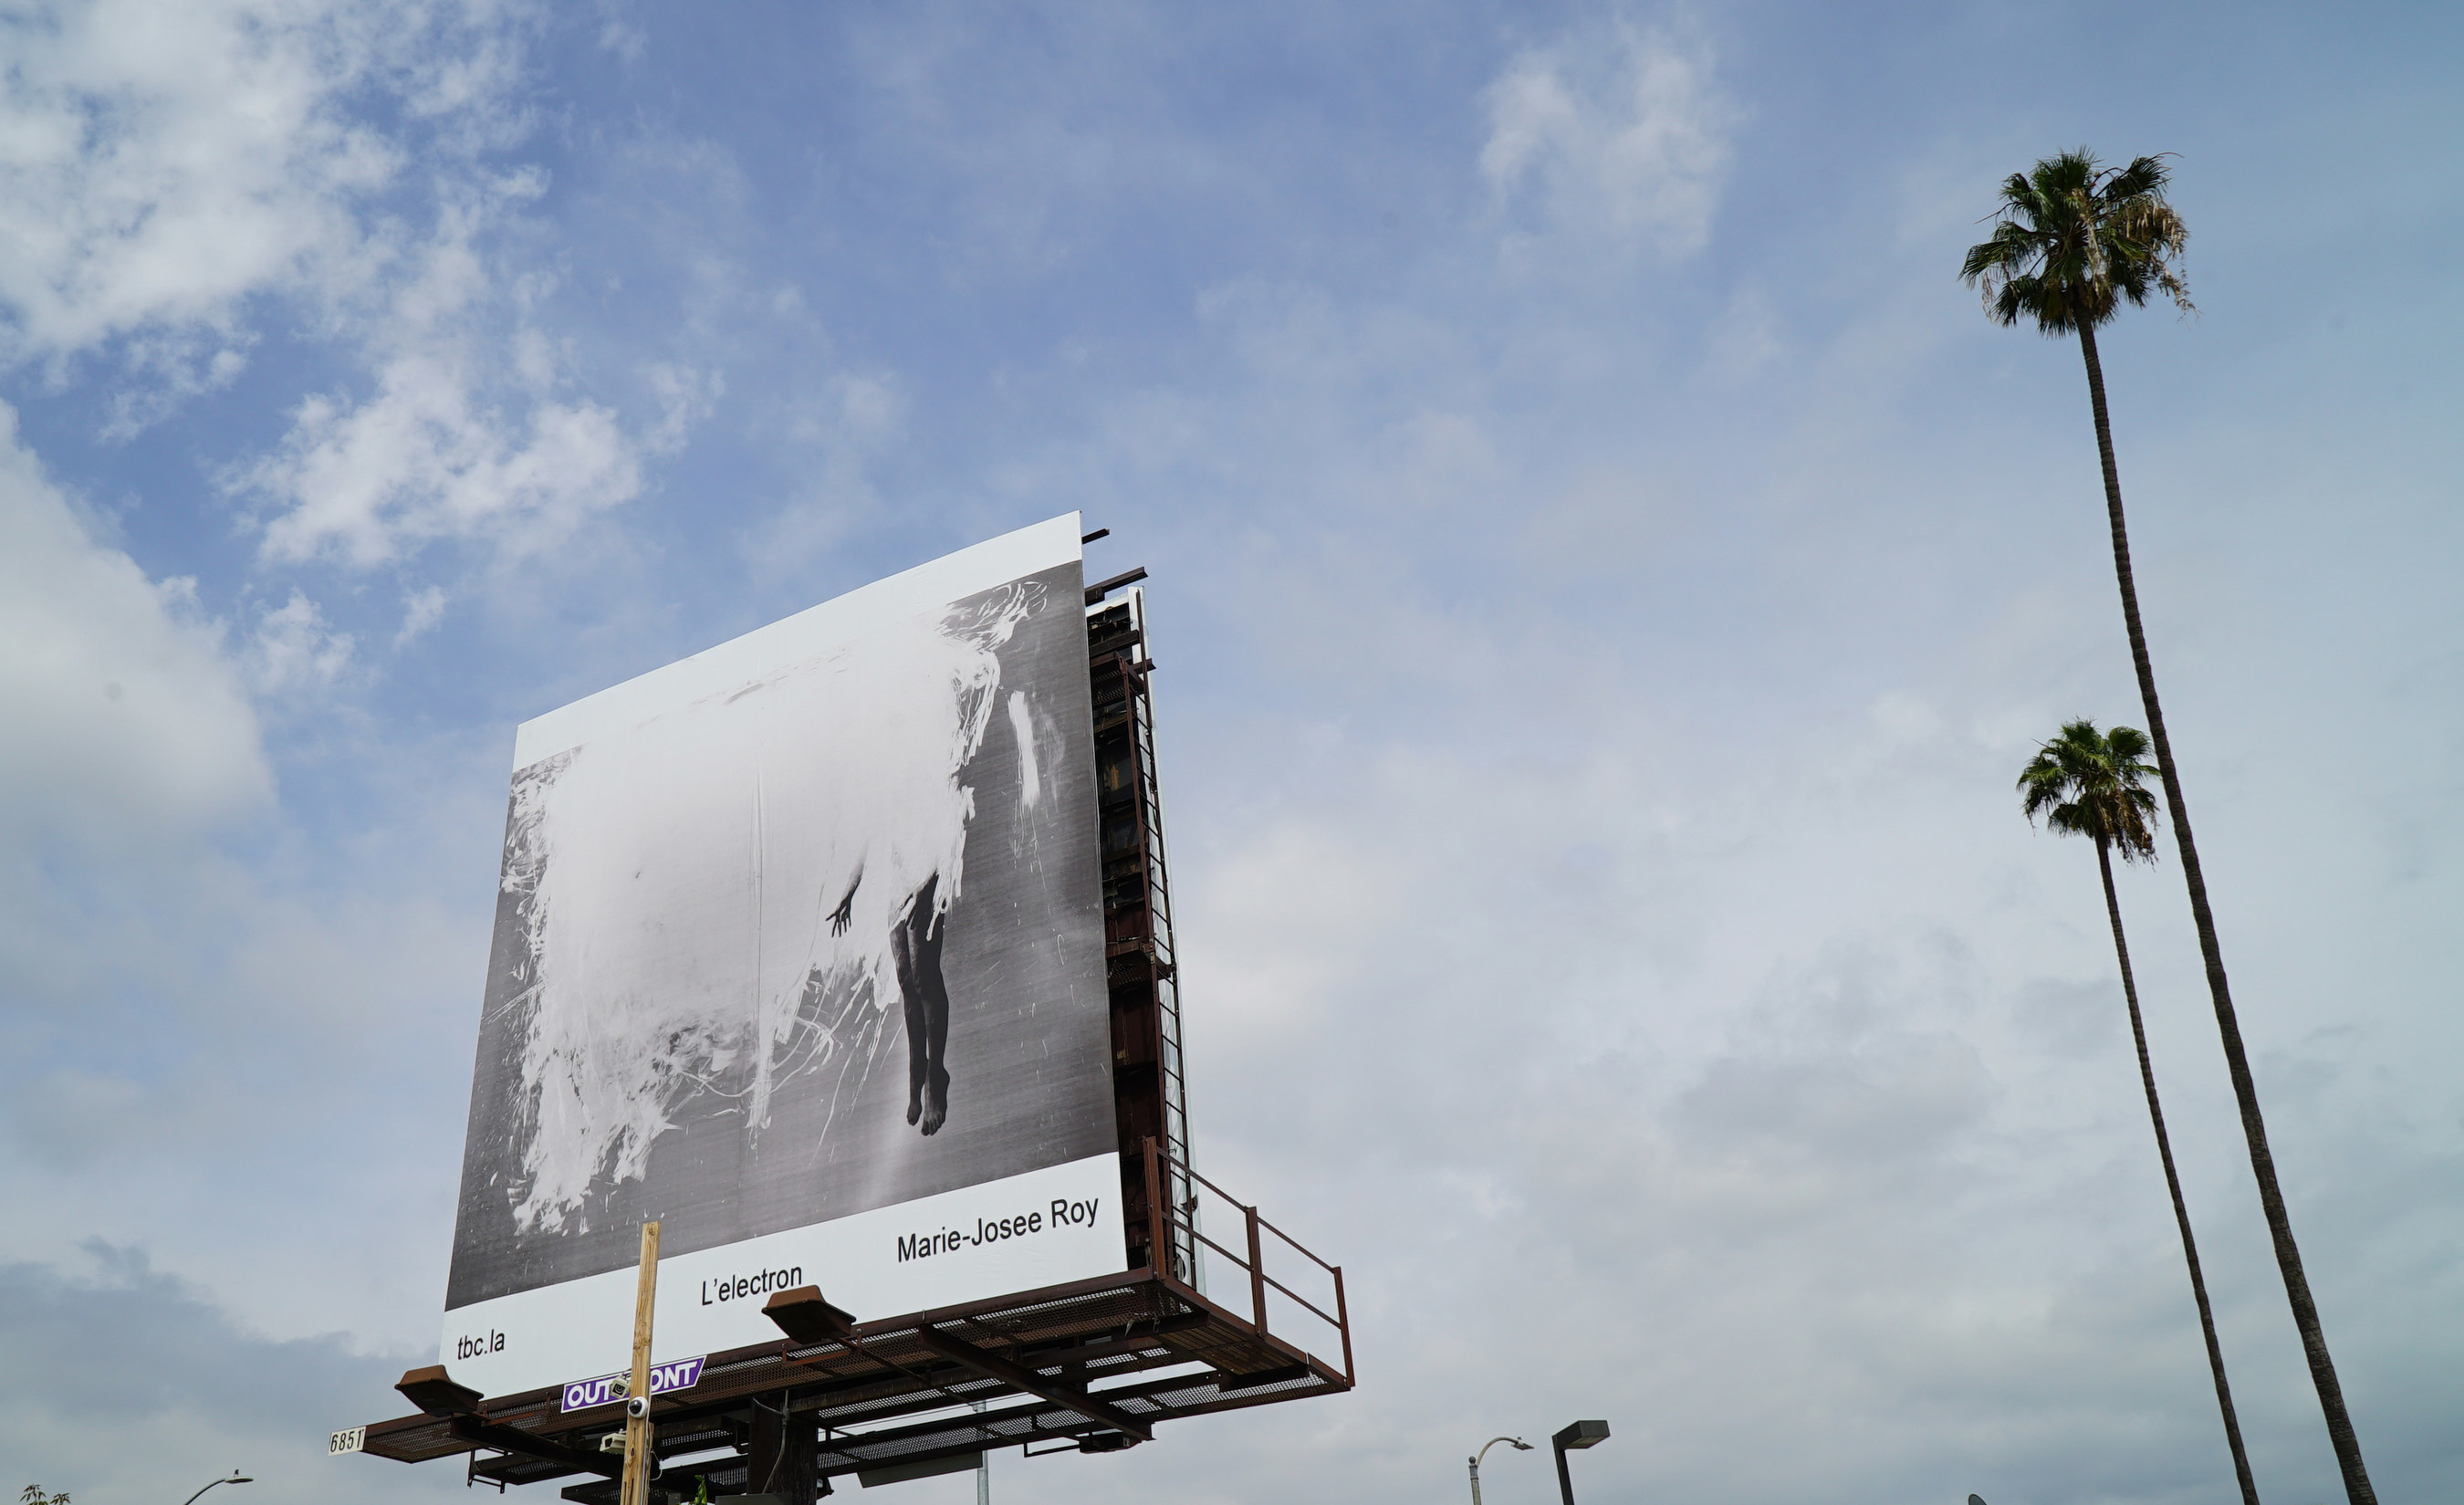 One of 14 works of art on display on billboards throughout Los Angeles through May 15 as part of The Billboard Creative Q1 2015 outdoor public art show.  This is the inaugural show from The Billboard Creative, a non-profit founded in 2014 with the goals of giving artists access to a mass audience and making art as assessable to Angelenos as the numerous billboards they view every day. Show map available at www.thebillboardcreative.com.  Artist: Marie-Josee Roy of Trois-Rivieres, Canada.  Location of this billboard:  Hollywood Blvd. just east of Western Avenue in Los Angeles.